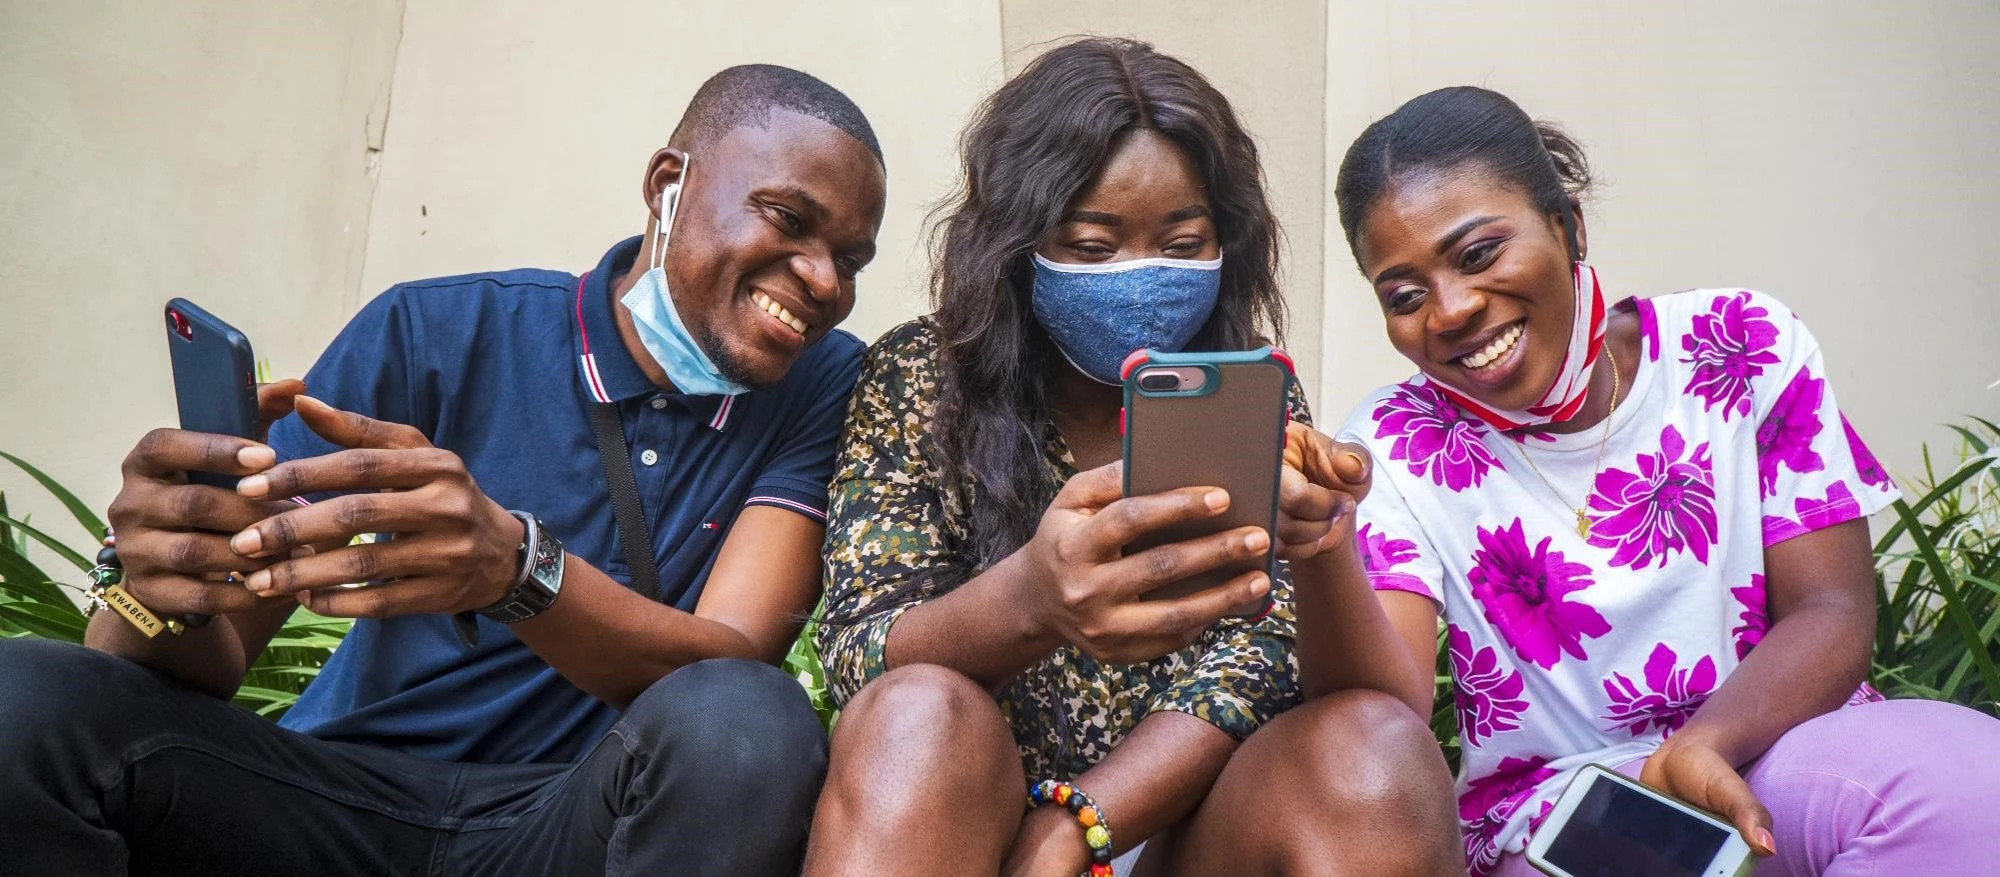 mobile phones are helping more and more people connect to the jobs, business opportunities, and services they need to escape poverty. 